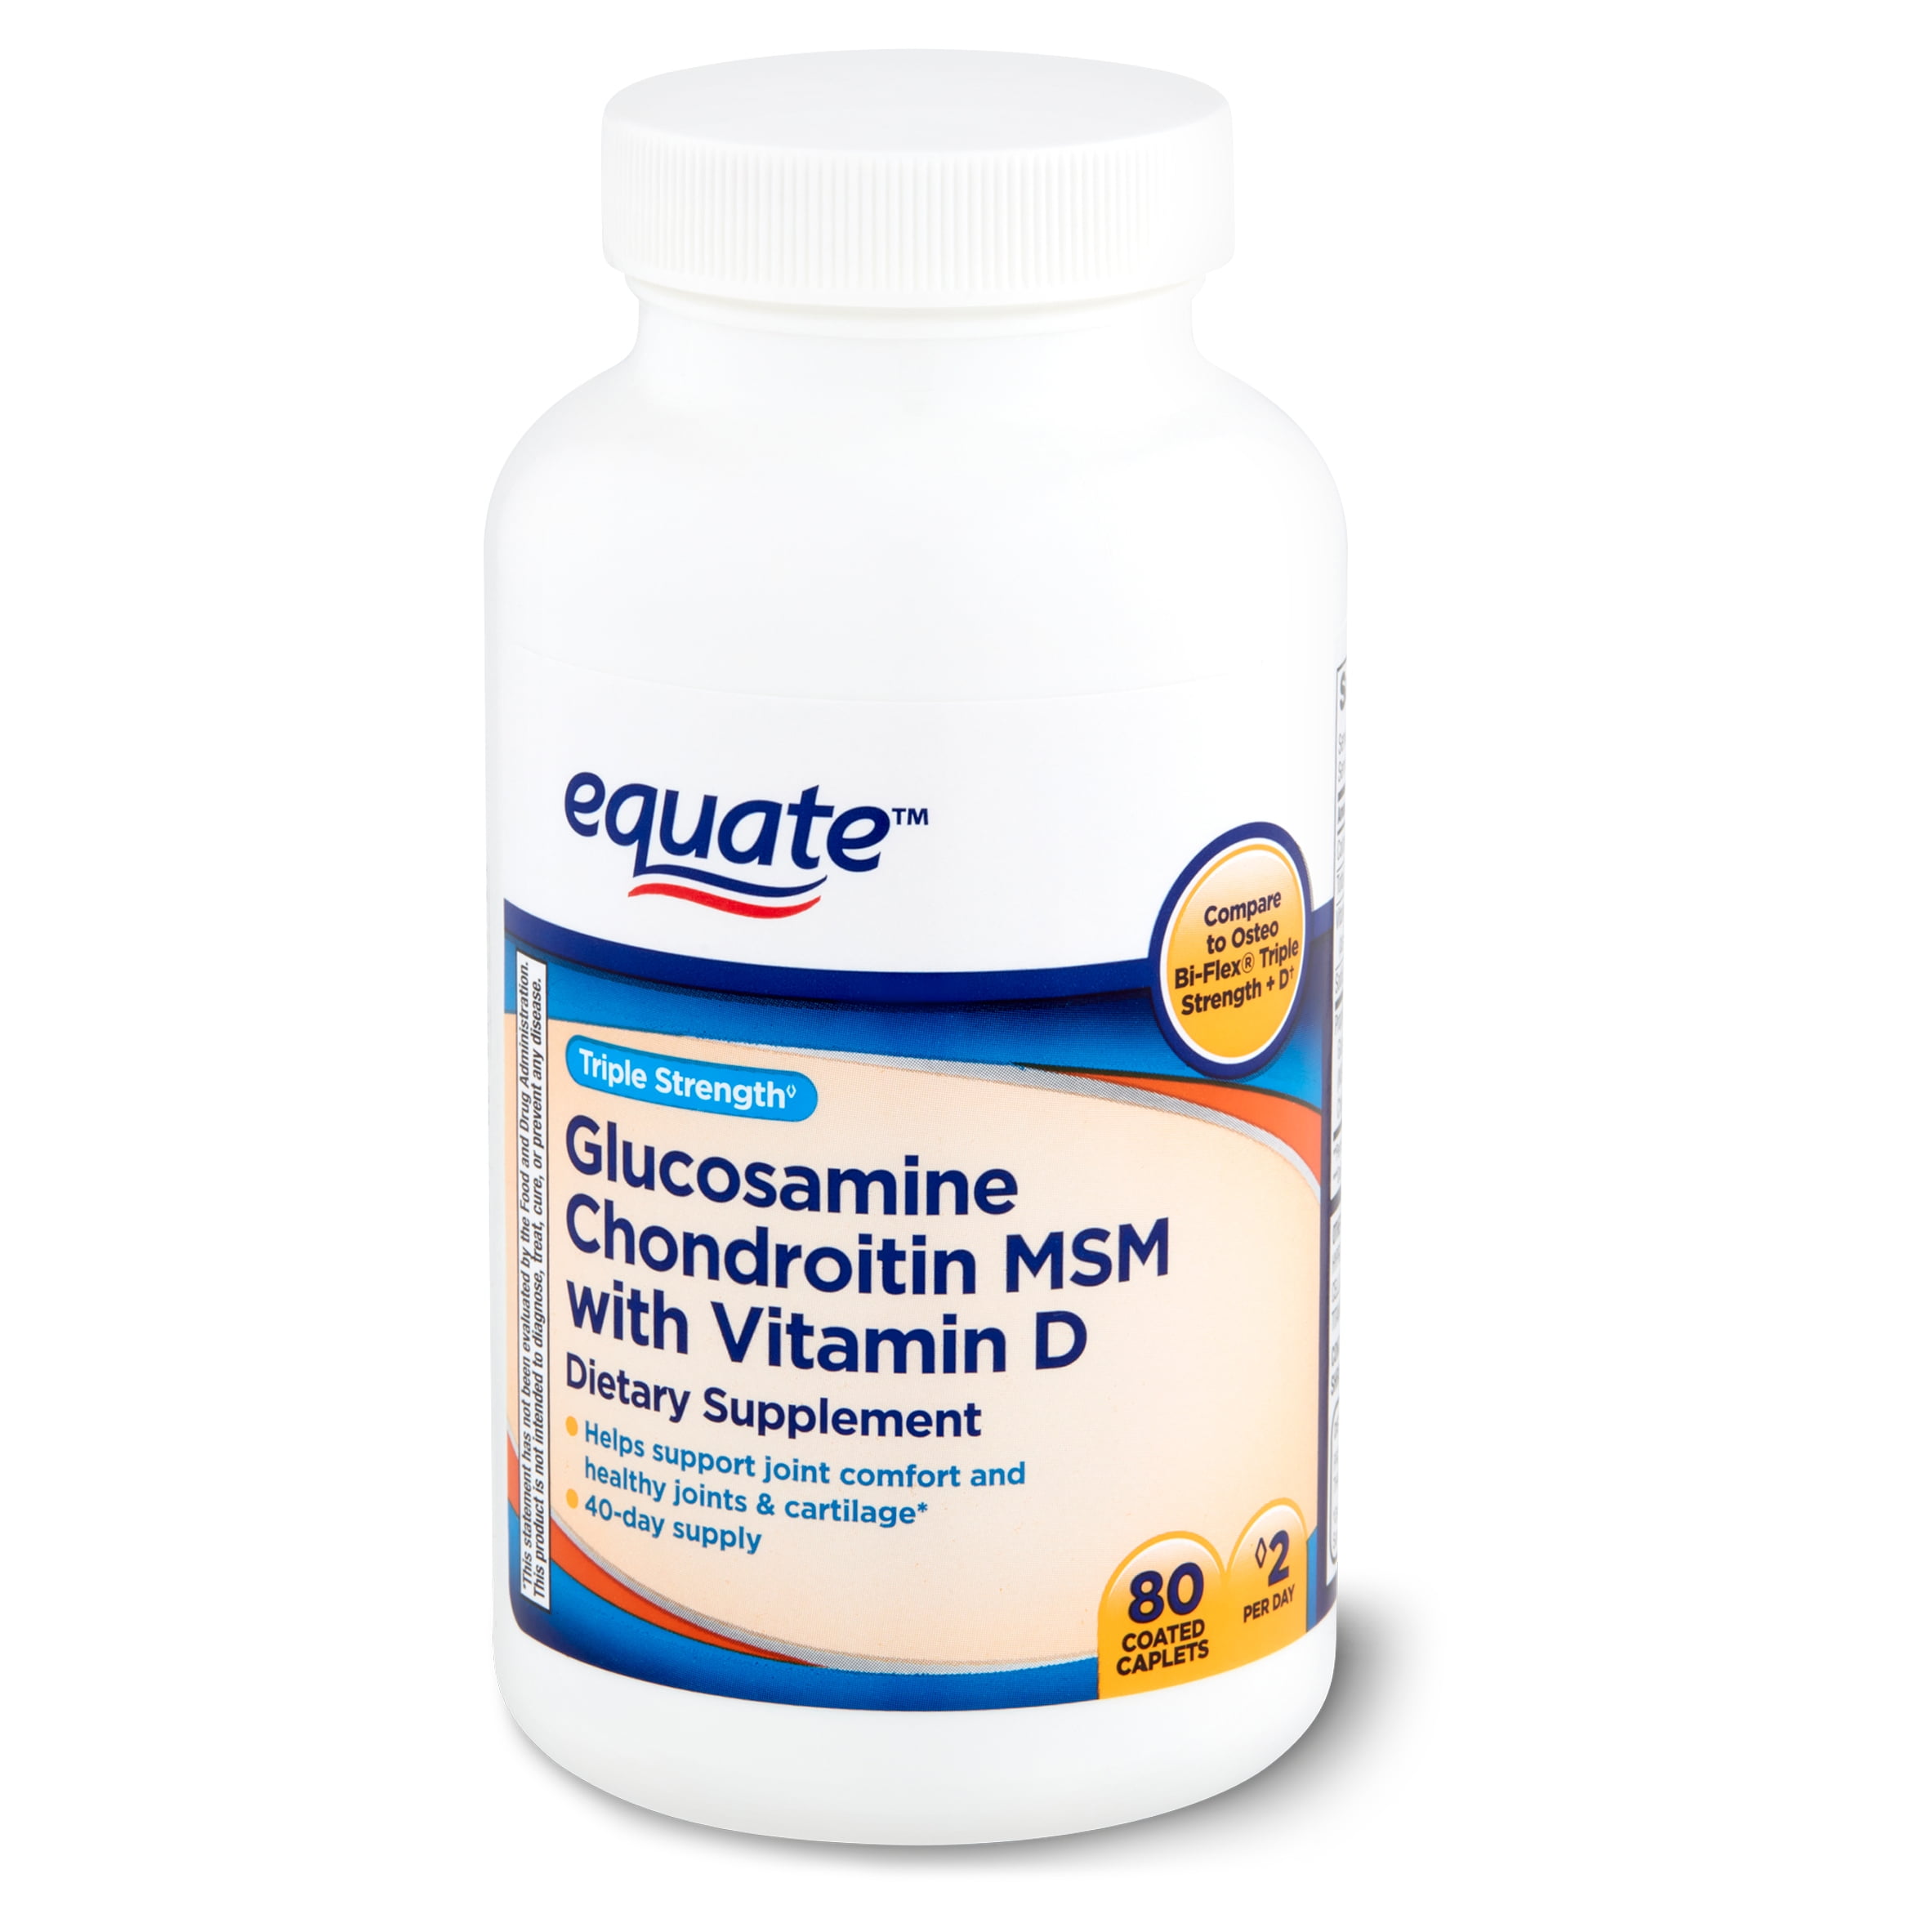 Equate Triple Strength Glucosamine MSM with Vitamin D Dietary Supplement, 80 count -